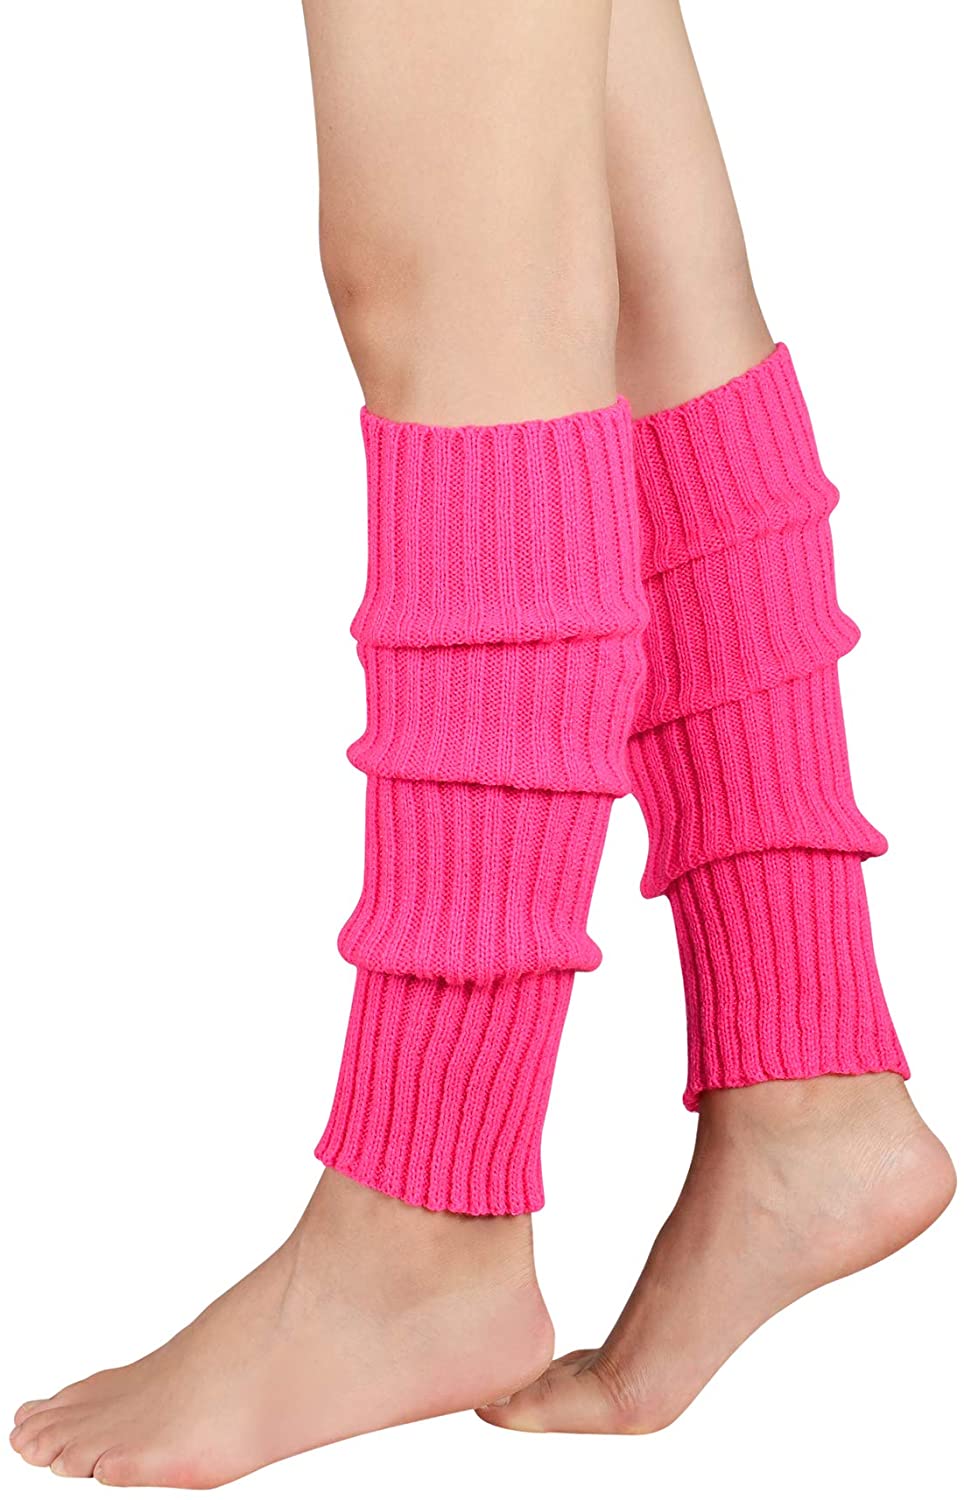 Thanksgiving Day Decoration ONME 3 Multicolor Pairs 80S Women Leg Warmer Socks Fashionable Leg Warmers for Sport Party Shopping Leg Warmers Home